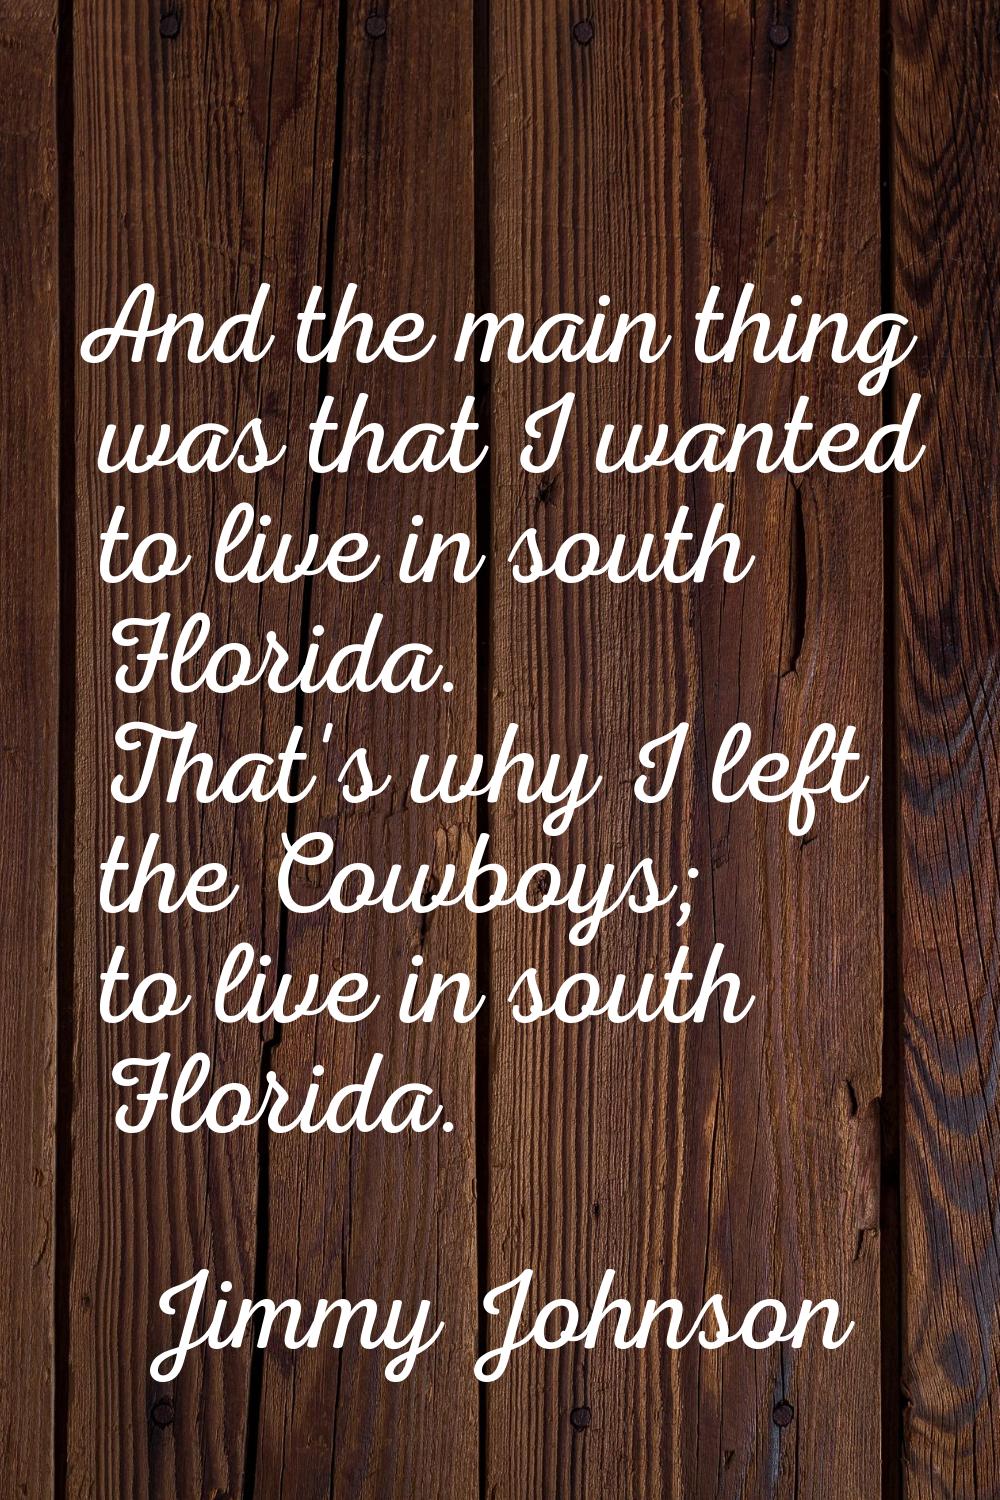 And the main thing was that I wanted to live in south Florida. That's why I left the Cowboys; to li